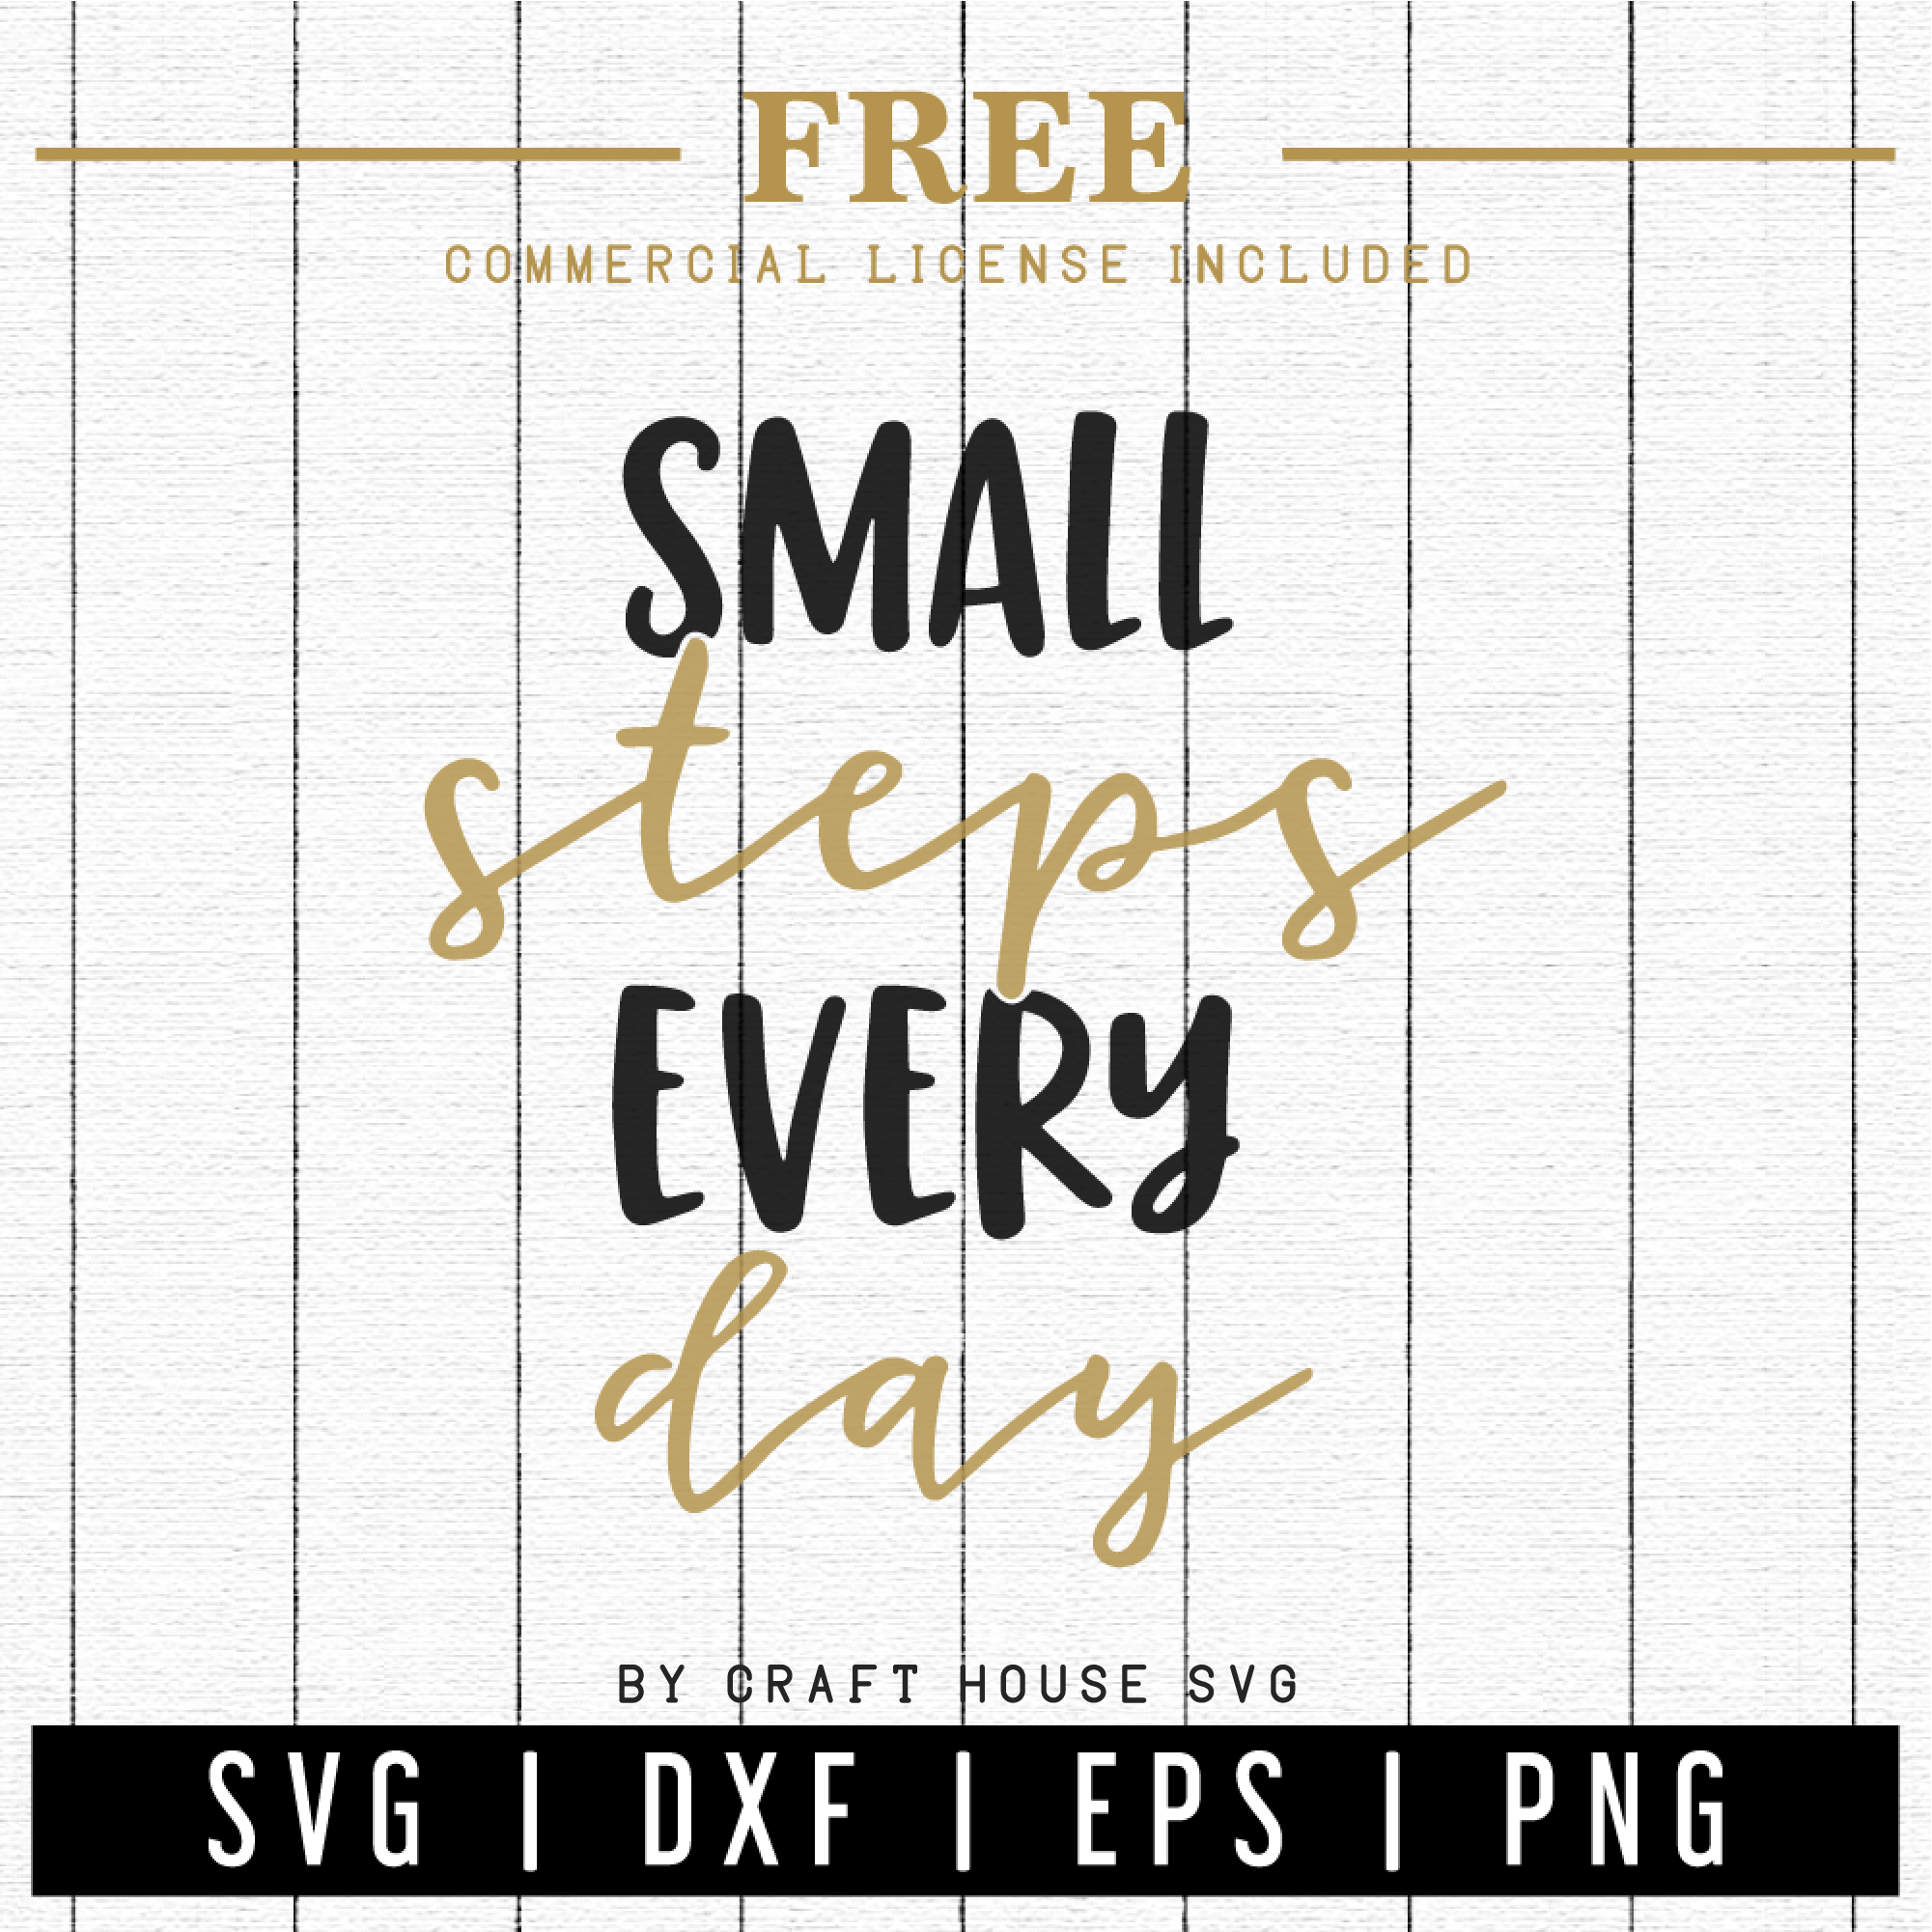 FREE | Small steps every day SVG | FB33 Craft House SVG - SVG files for Cricut and Silhouette